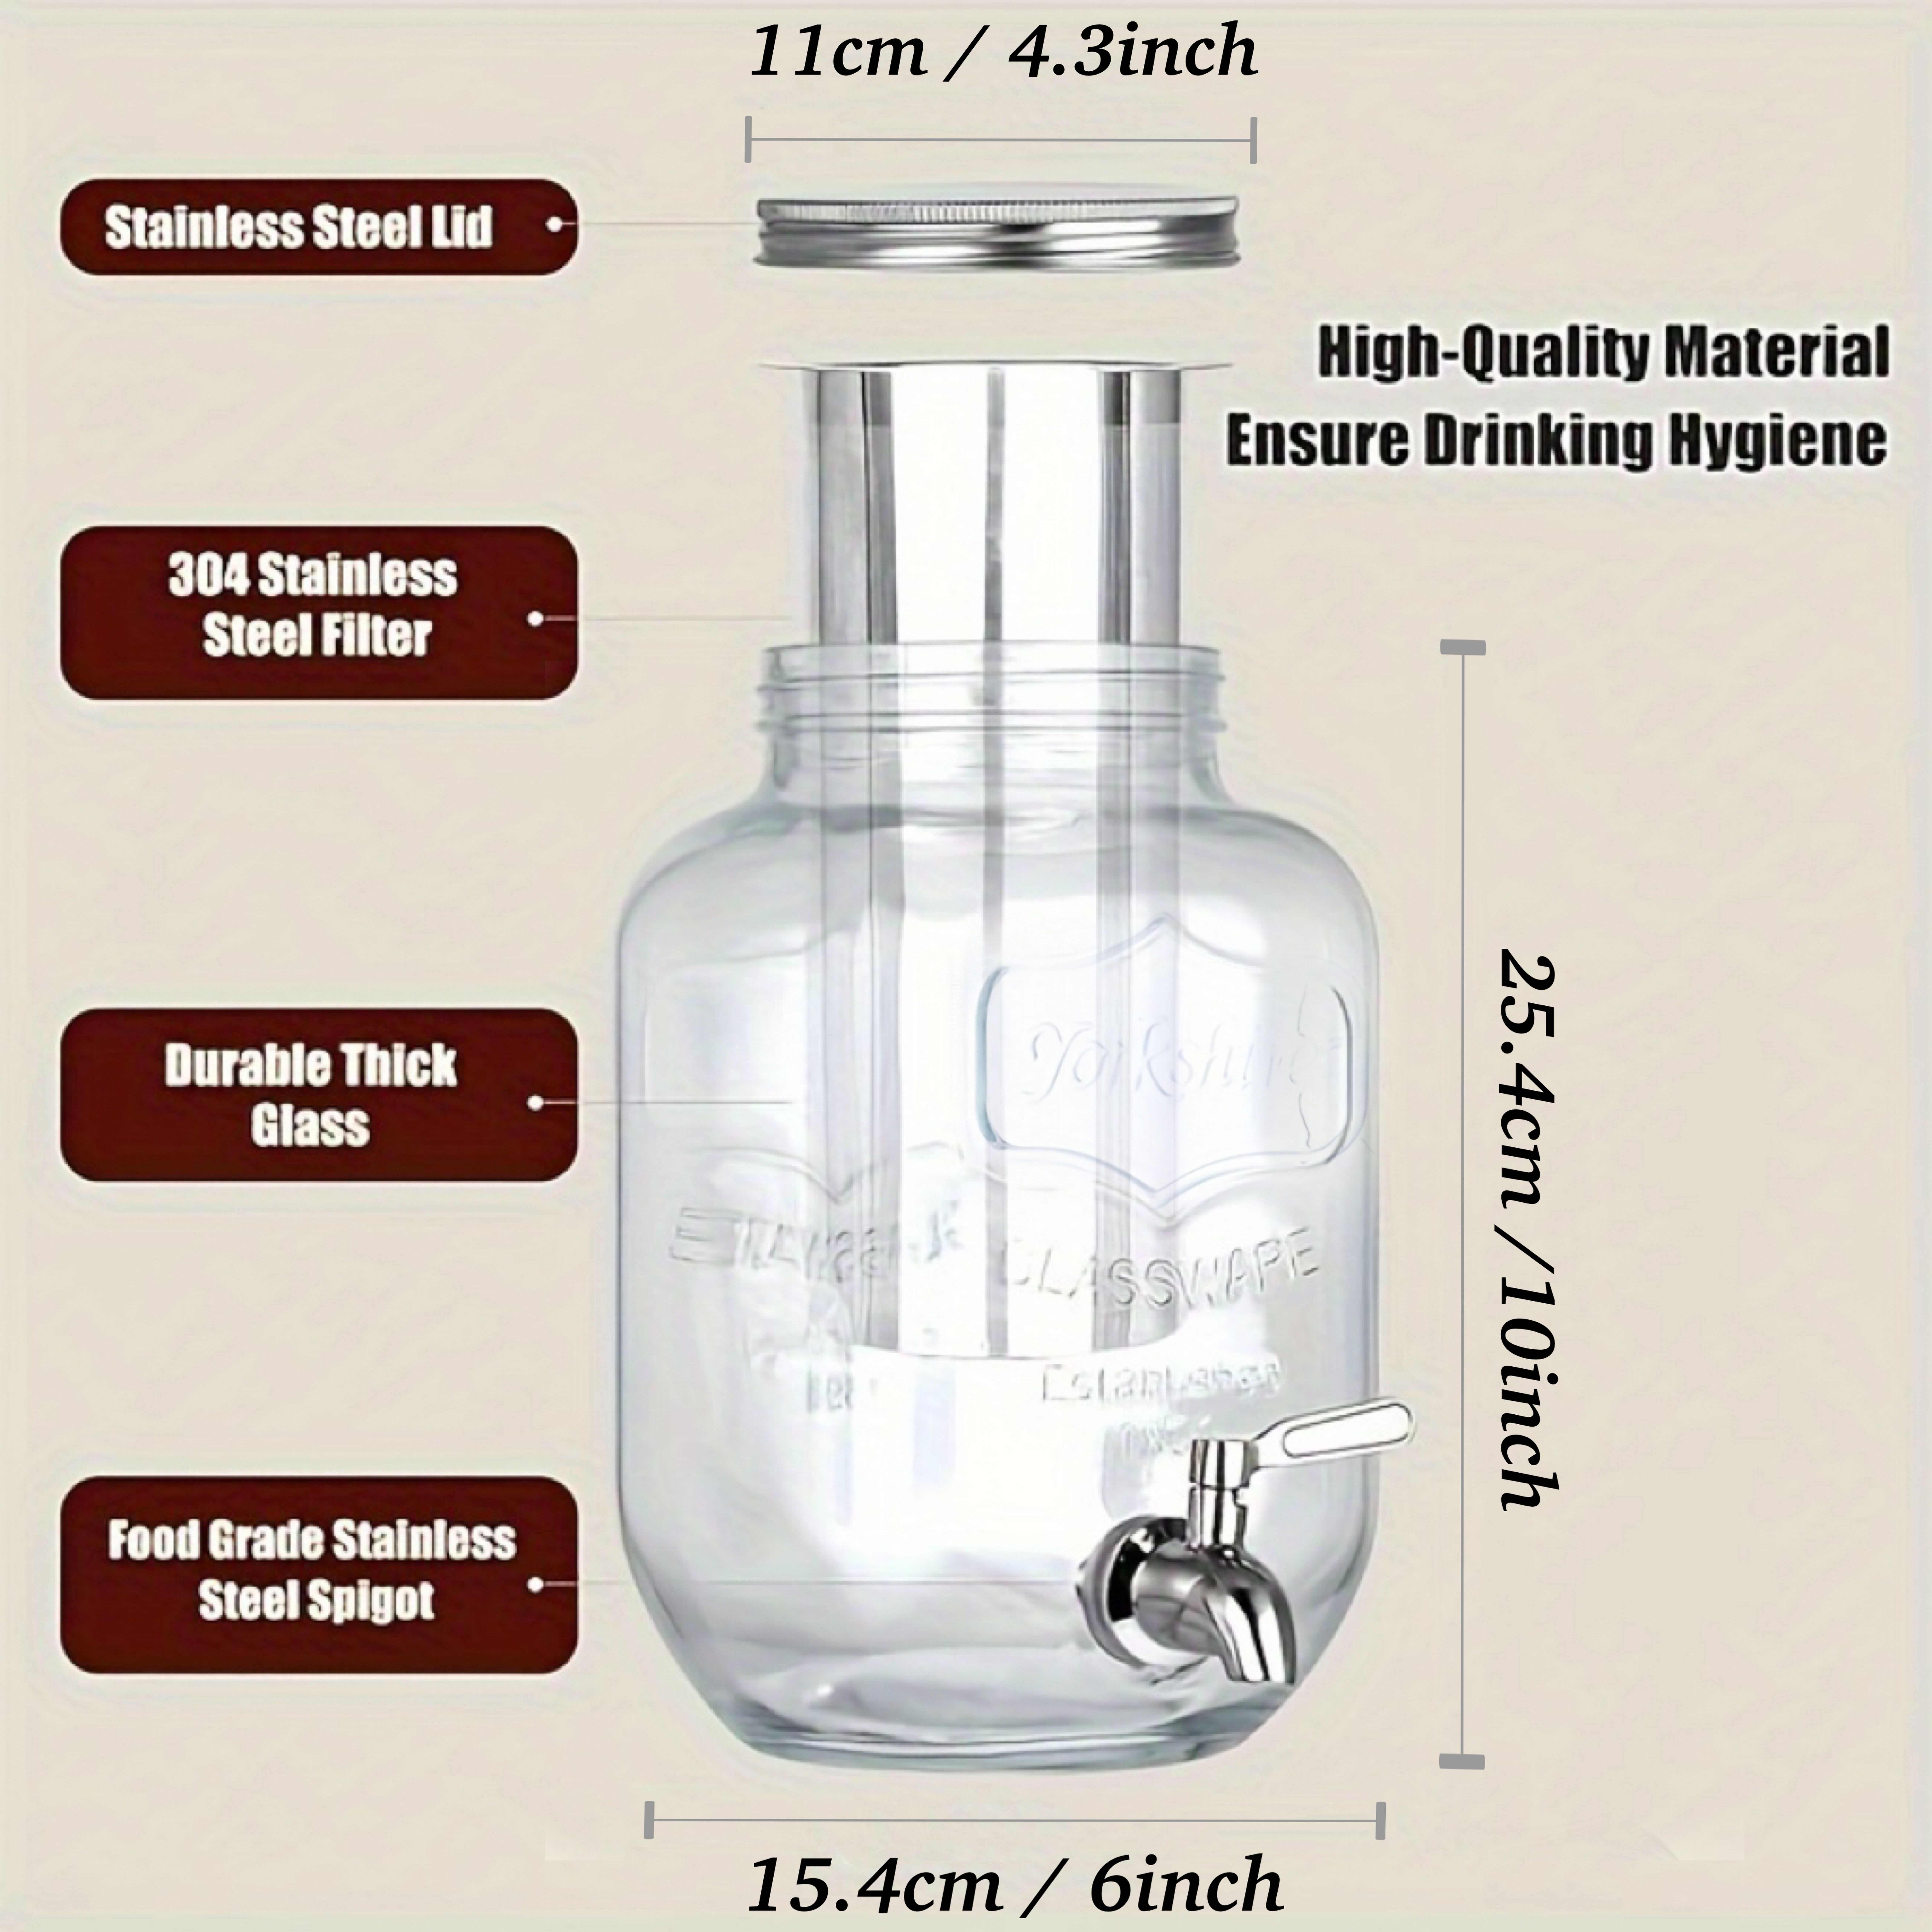 1 Gallon Cold Brew Coffee Maker, Easy Pour Stainless Steel Spigot Tap